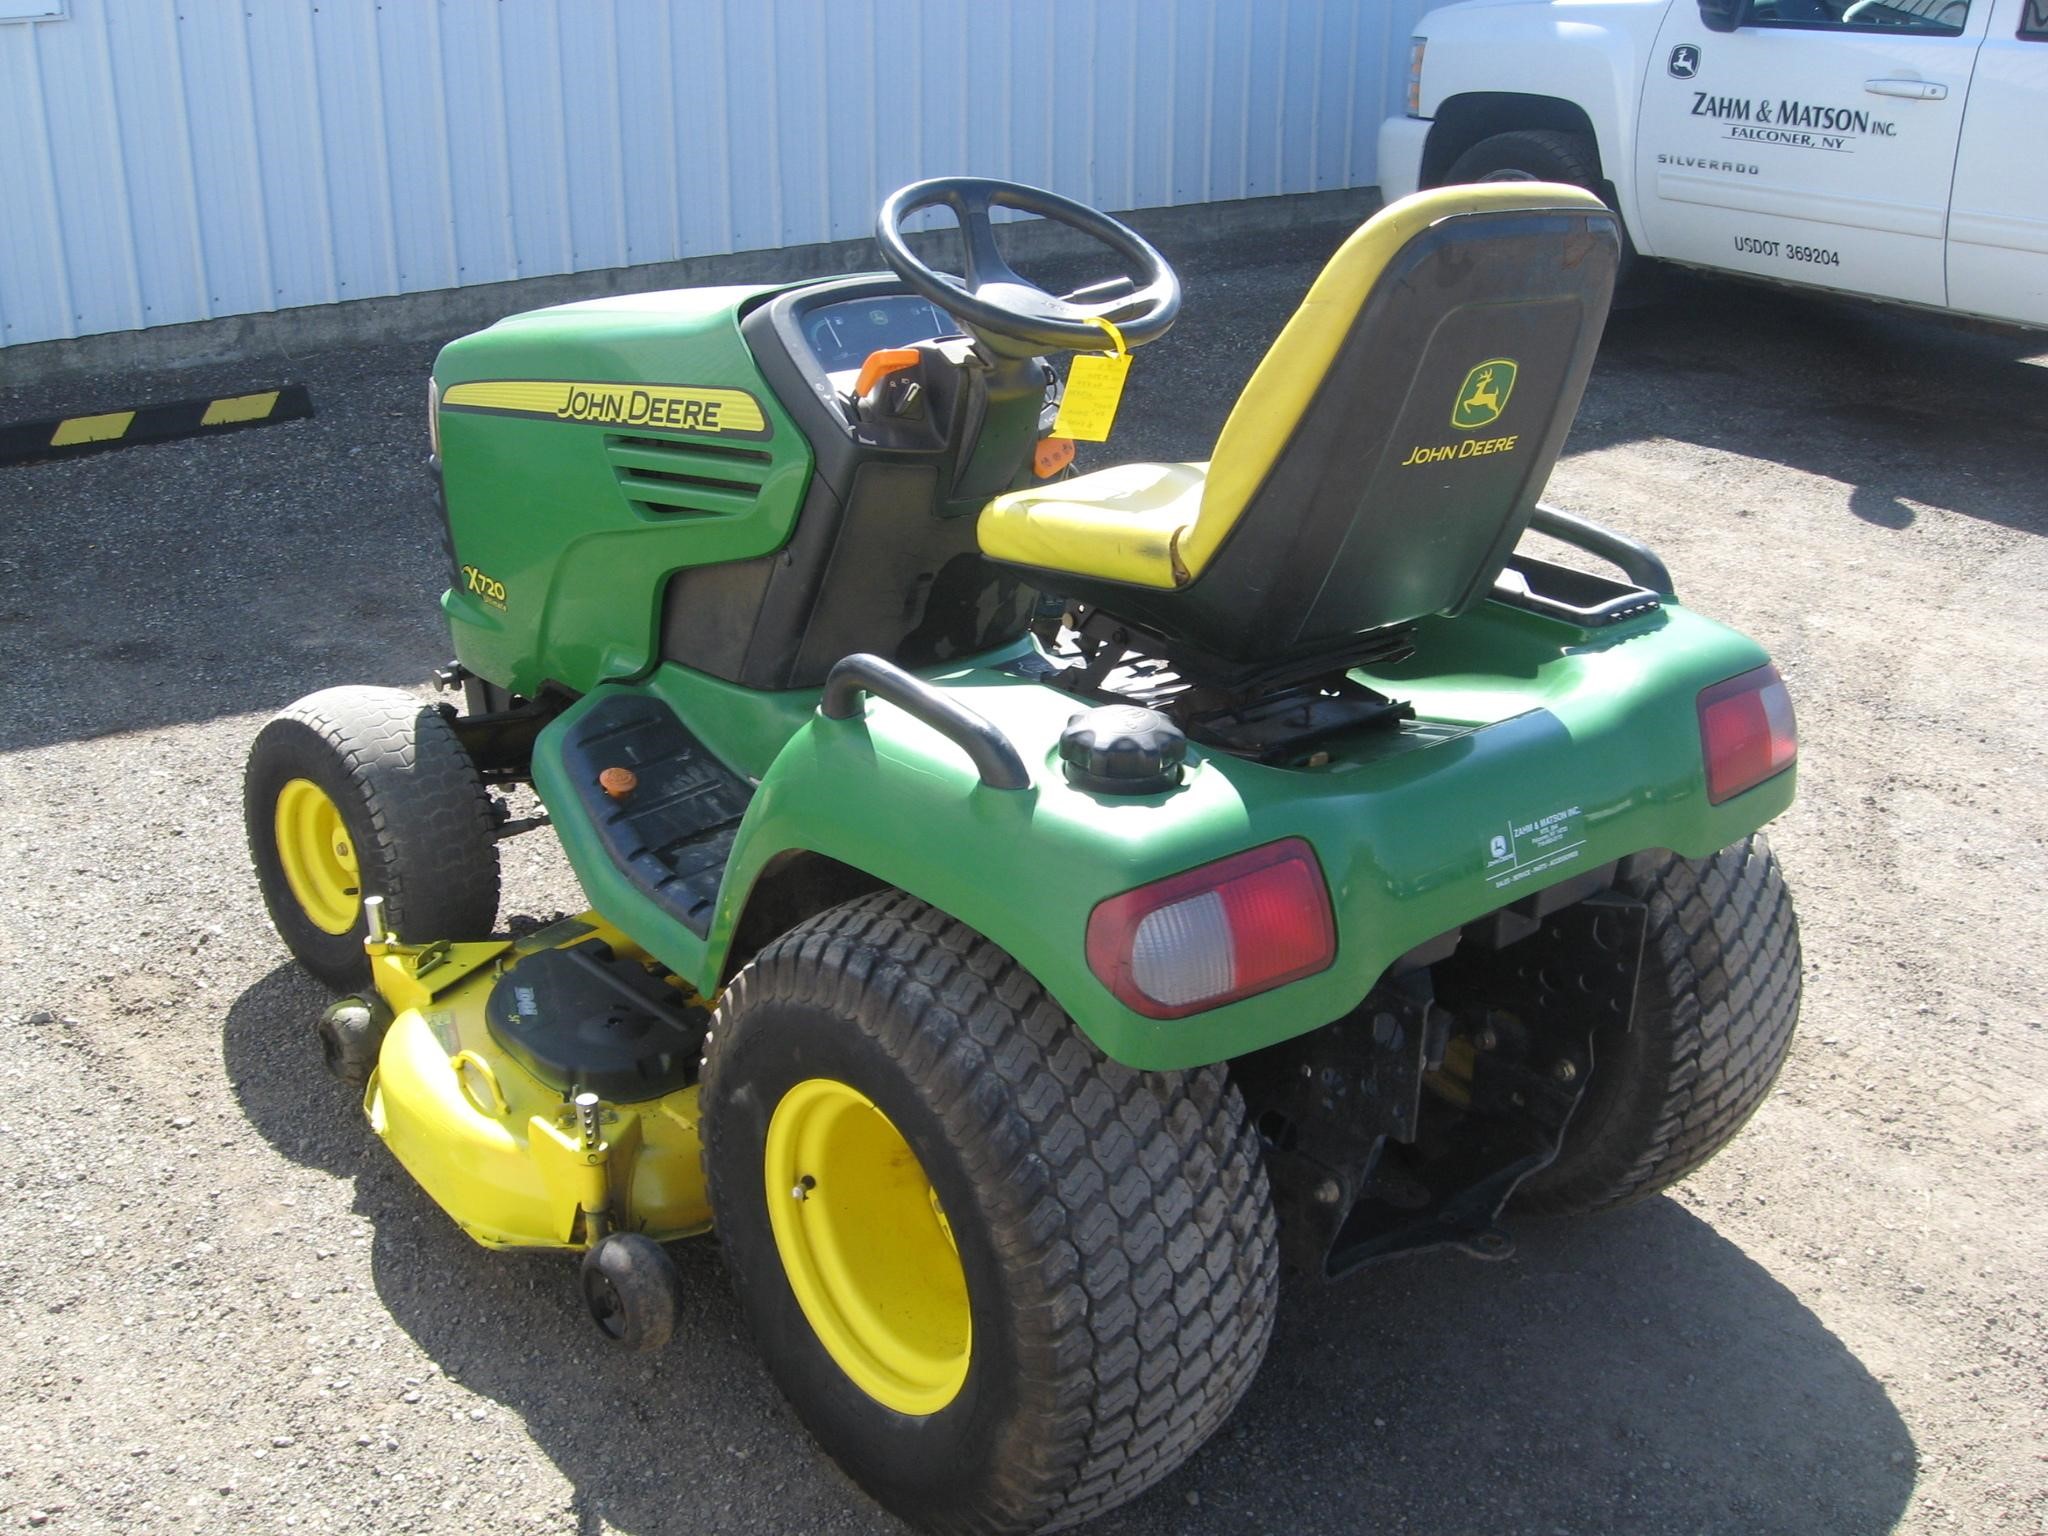 Wisconsin Ag Connection - JOHN DEERE X720 Riding Lawn ...